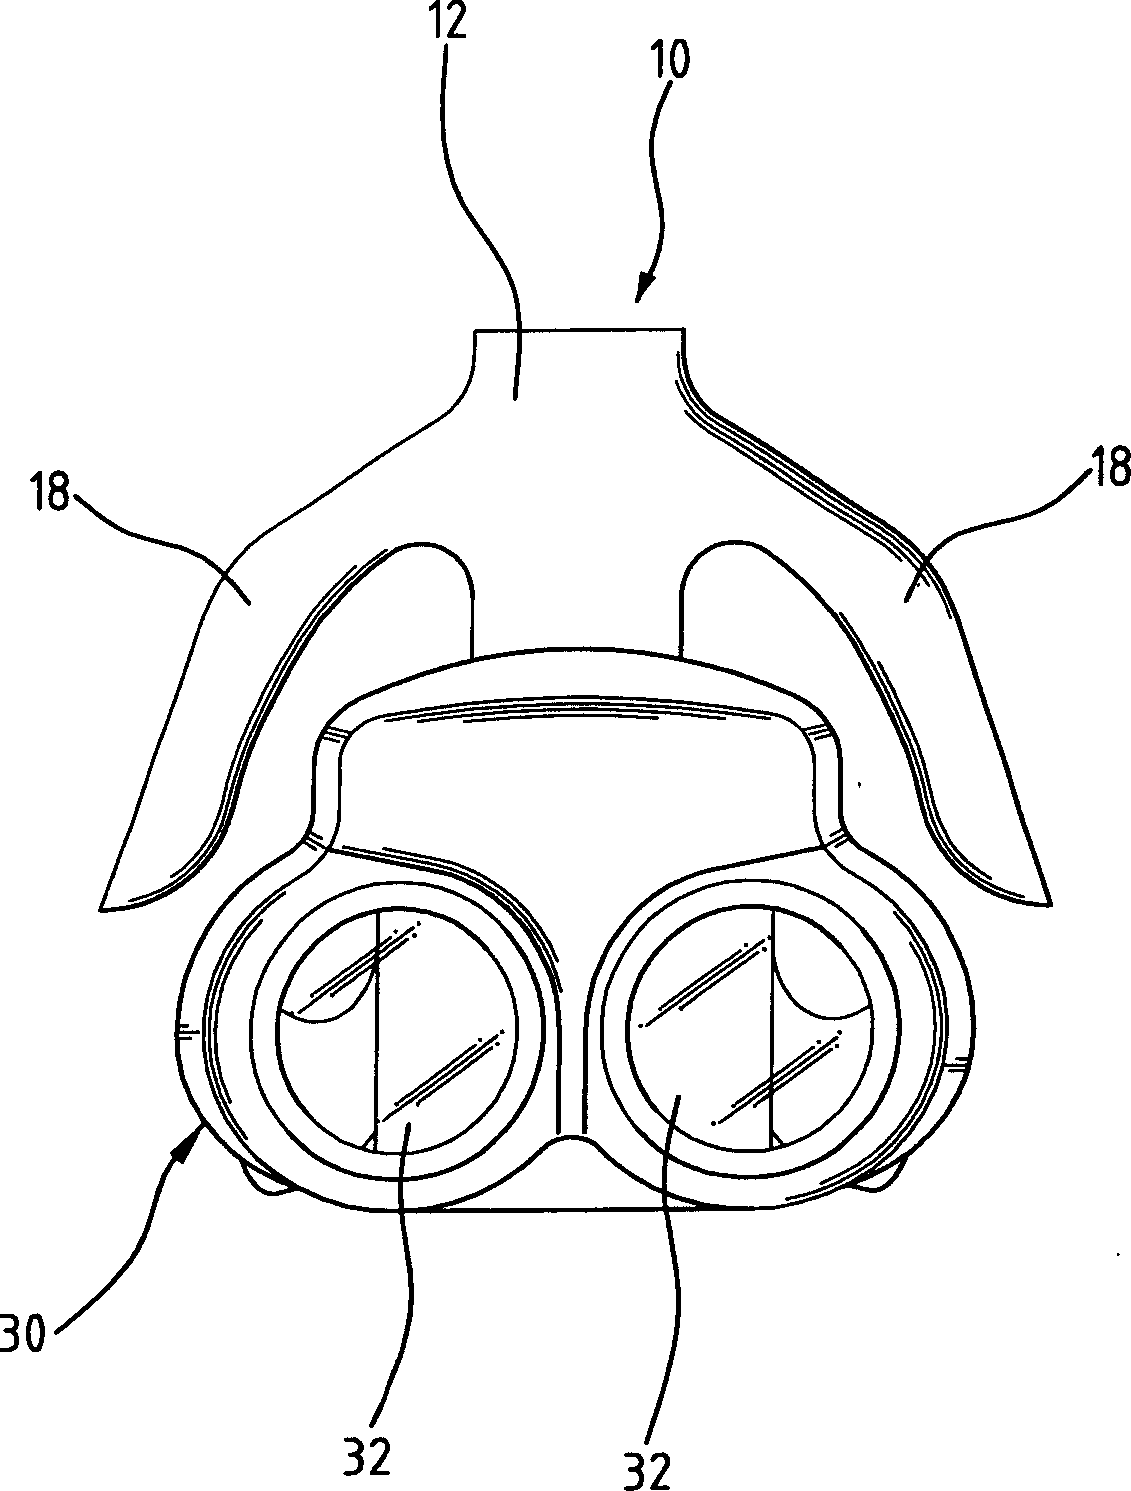 Head-mounting device